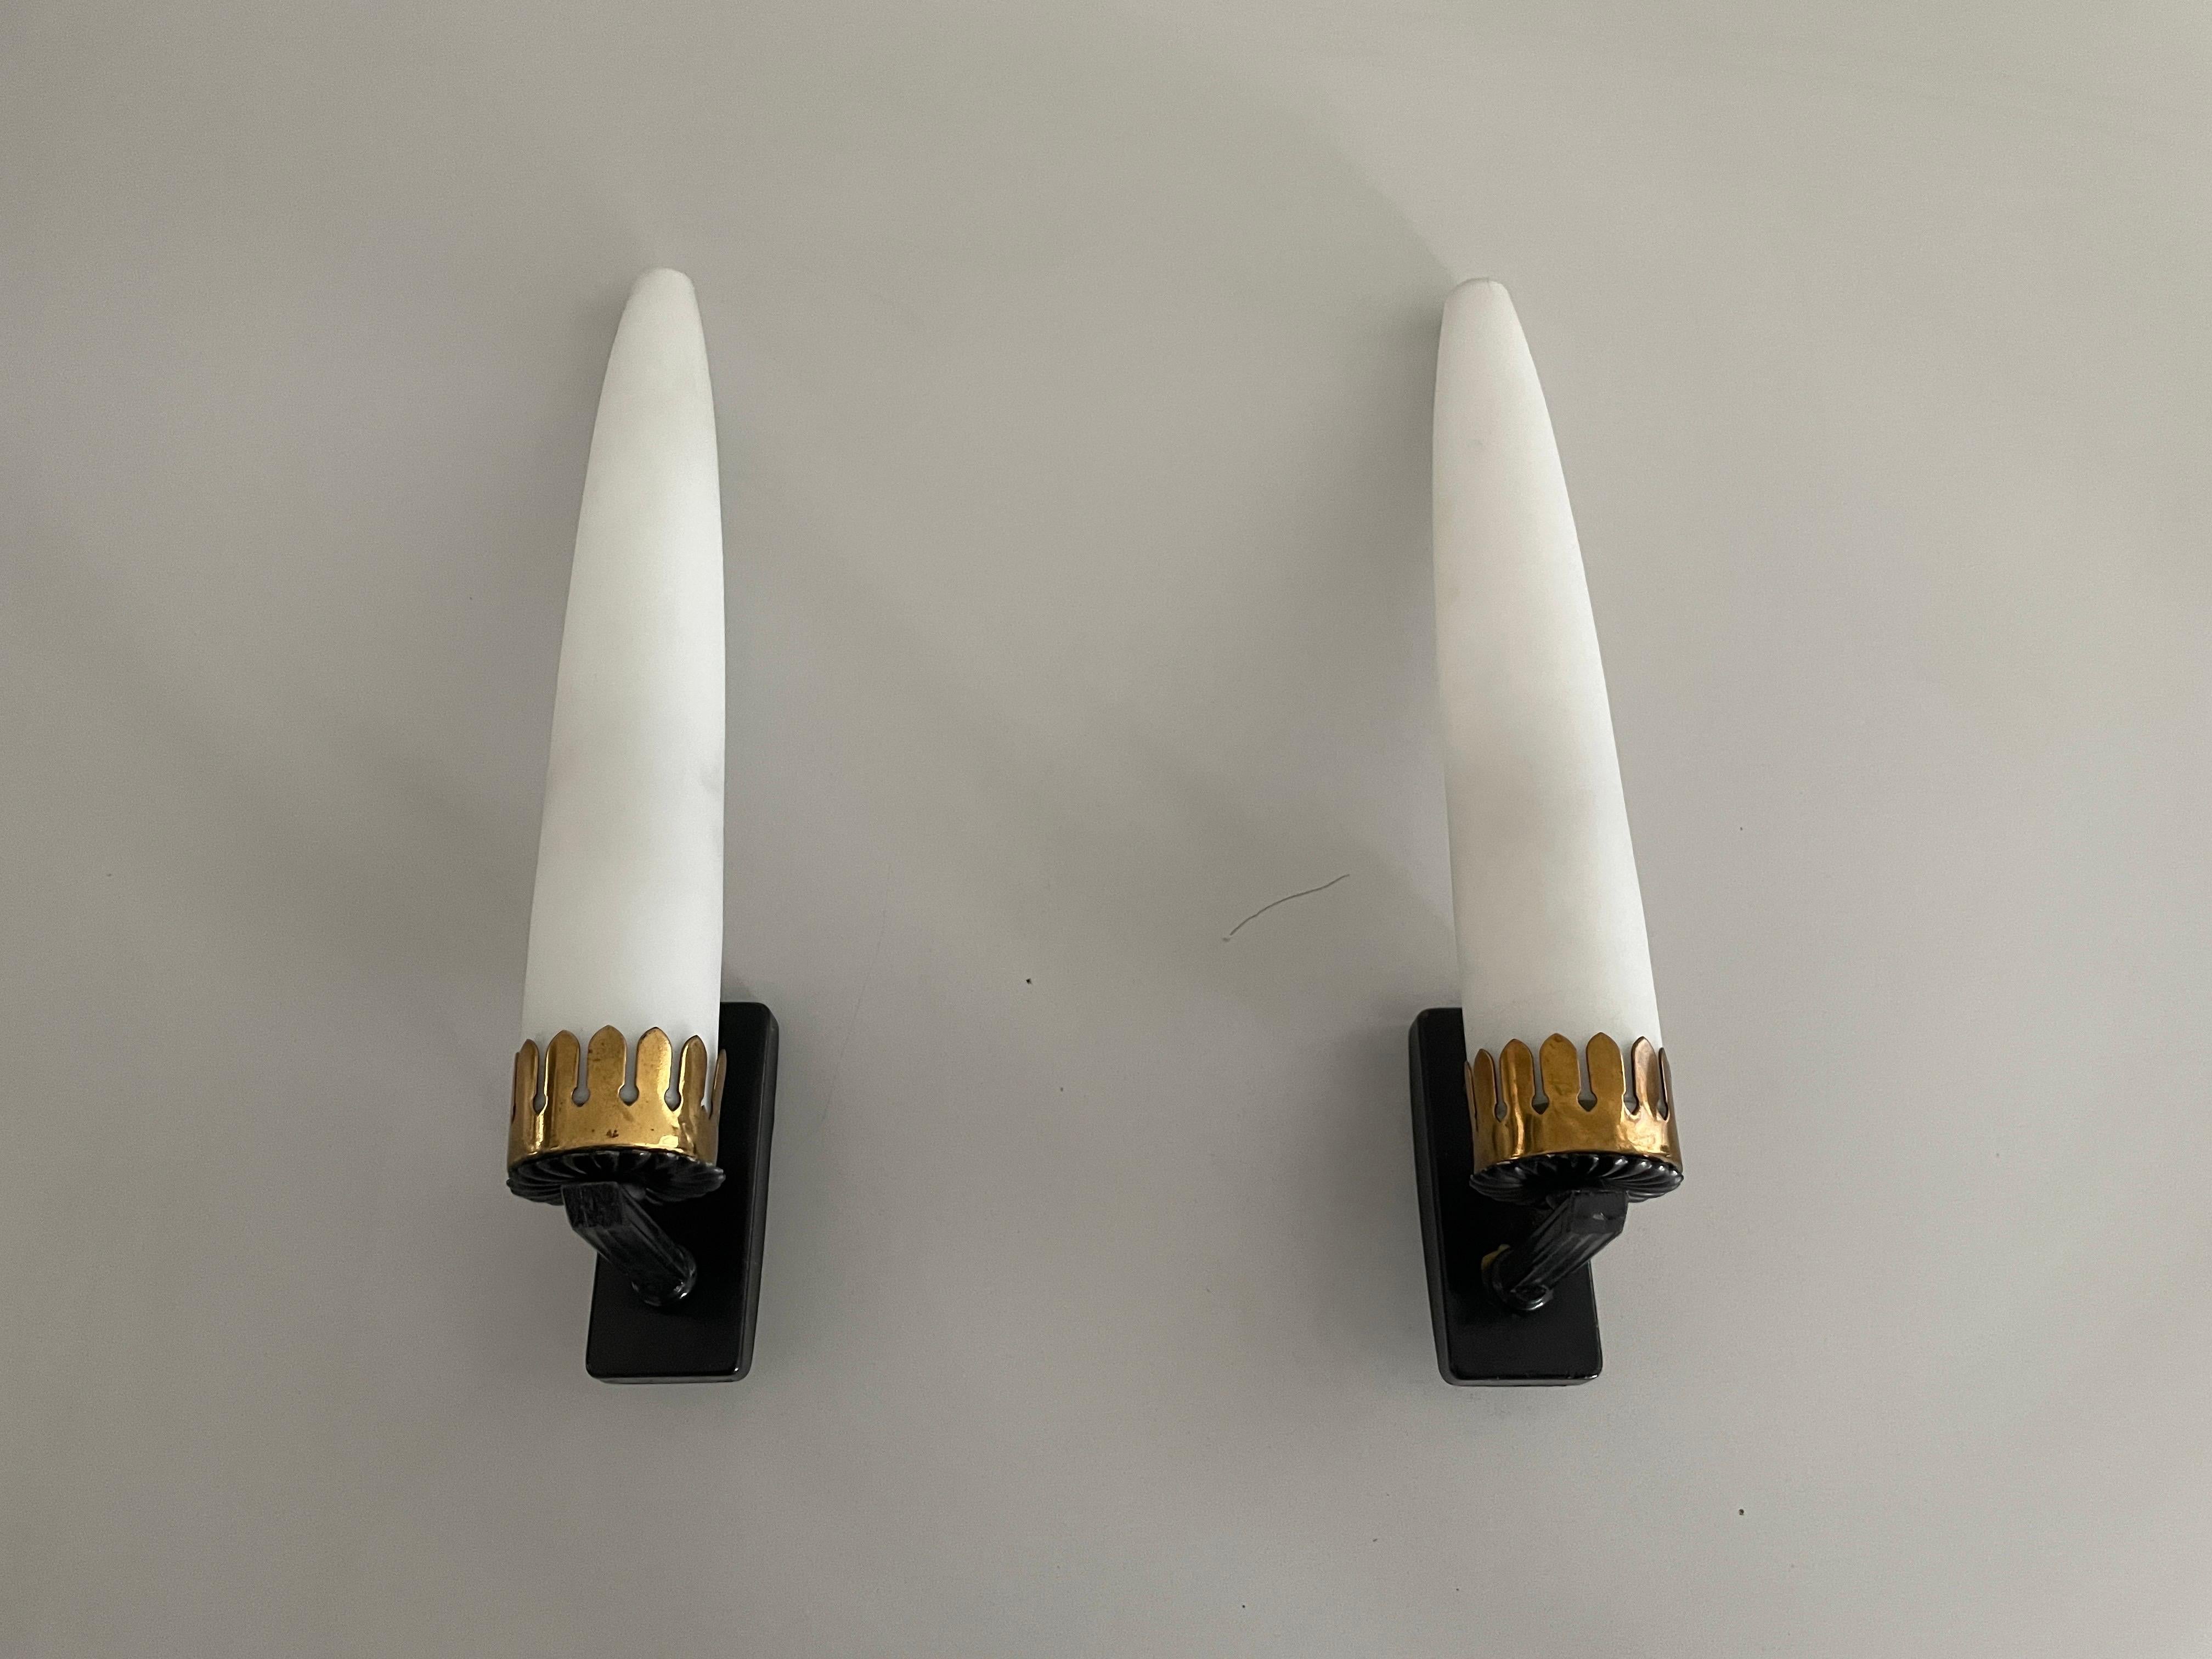 Mid Century Modern Long White Glass Tubes Pair of Sconces, 1960s, Italy

Very elegant and minimal design wall lamps
Lamp is in very good condition.

These lamps works with E14 standard light bulbs. 
Wired and suitable to use in all countries.